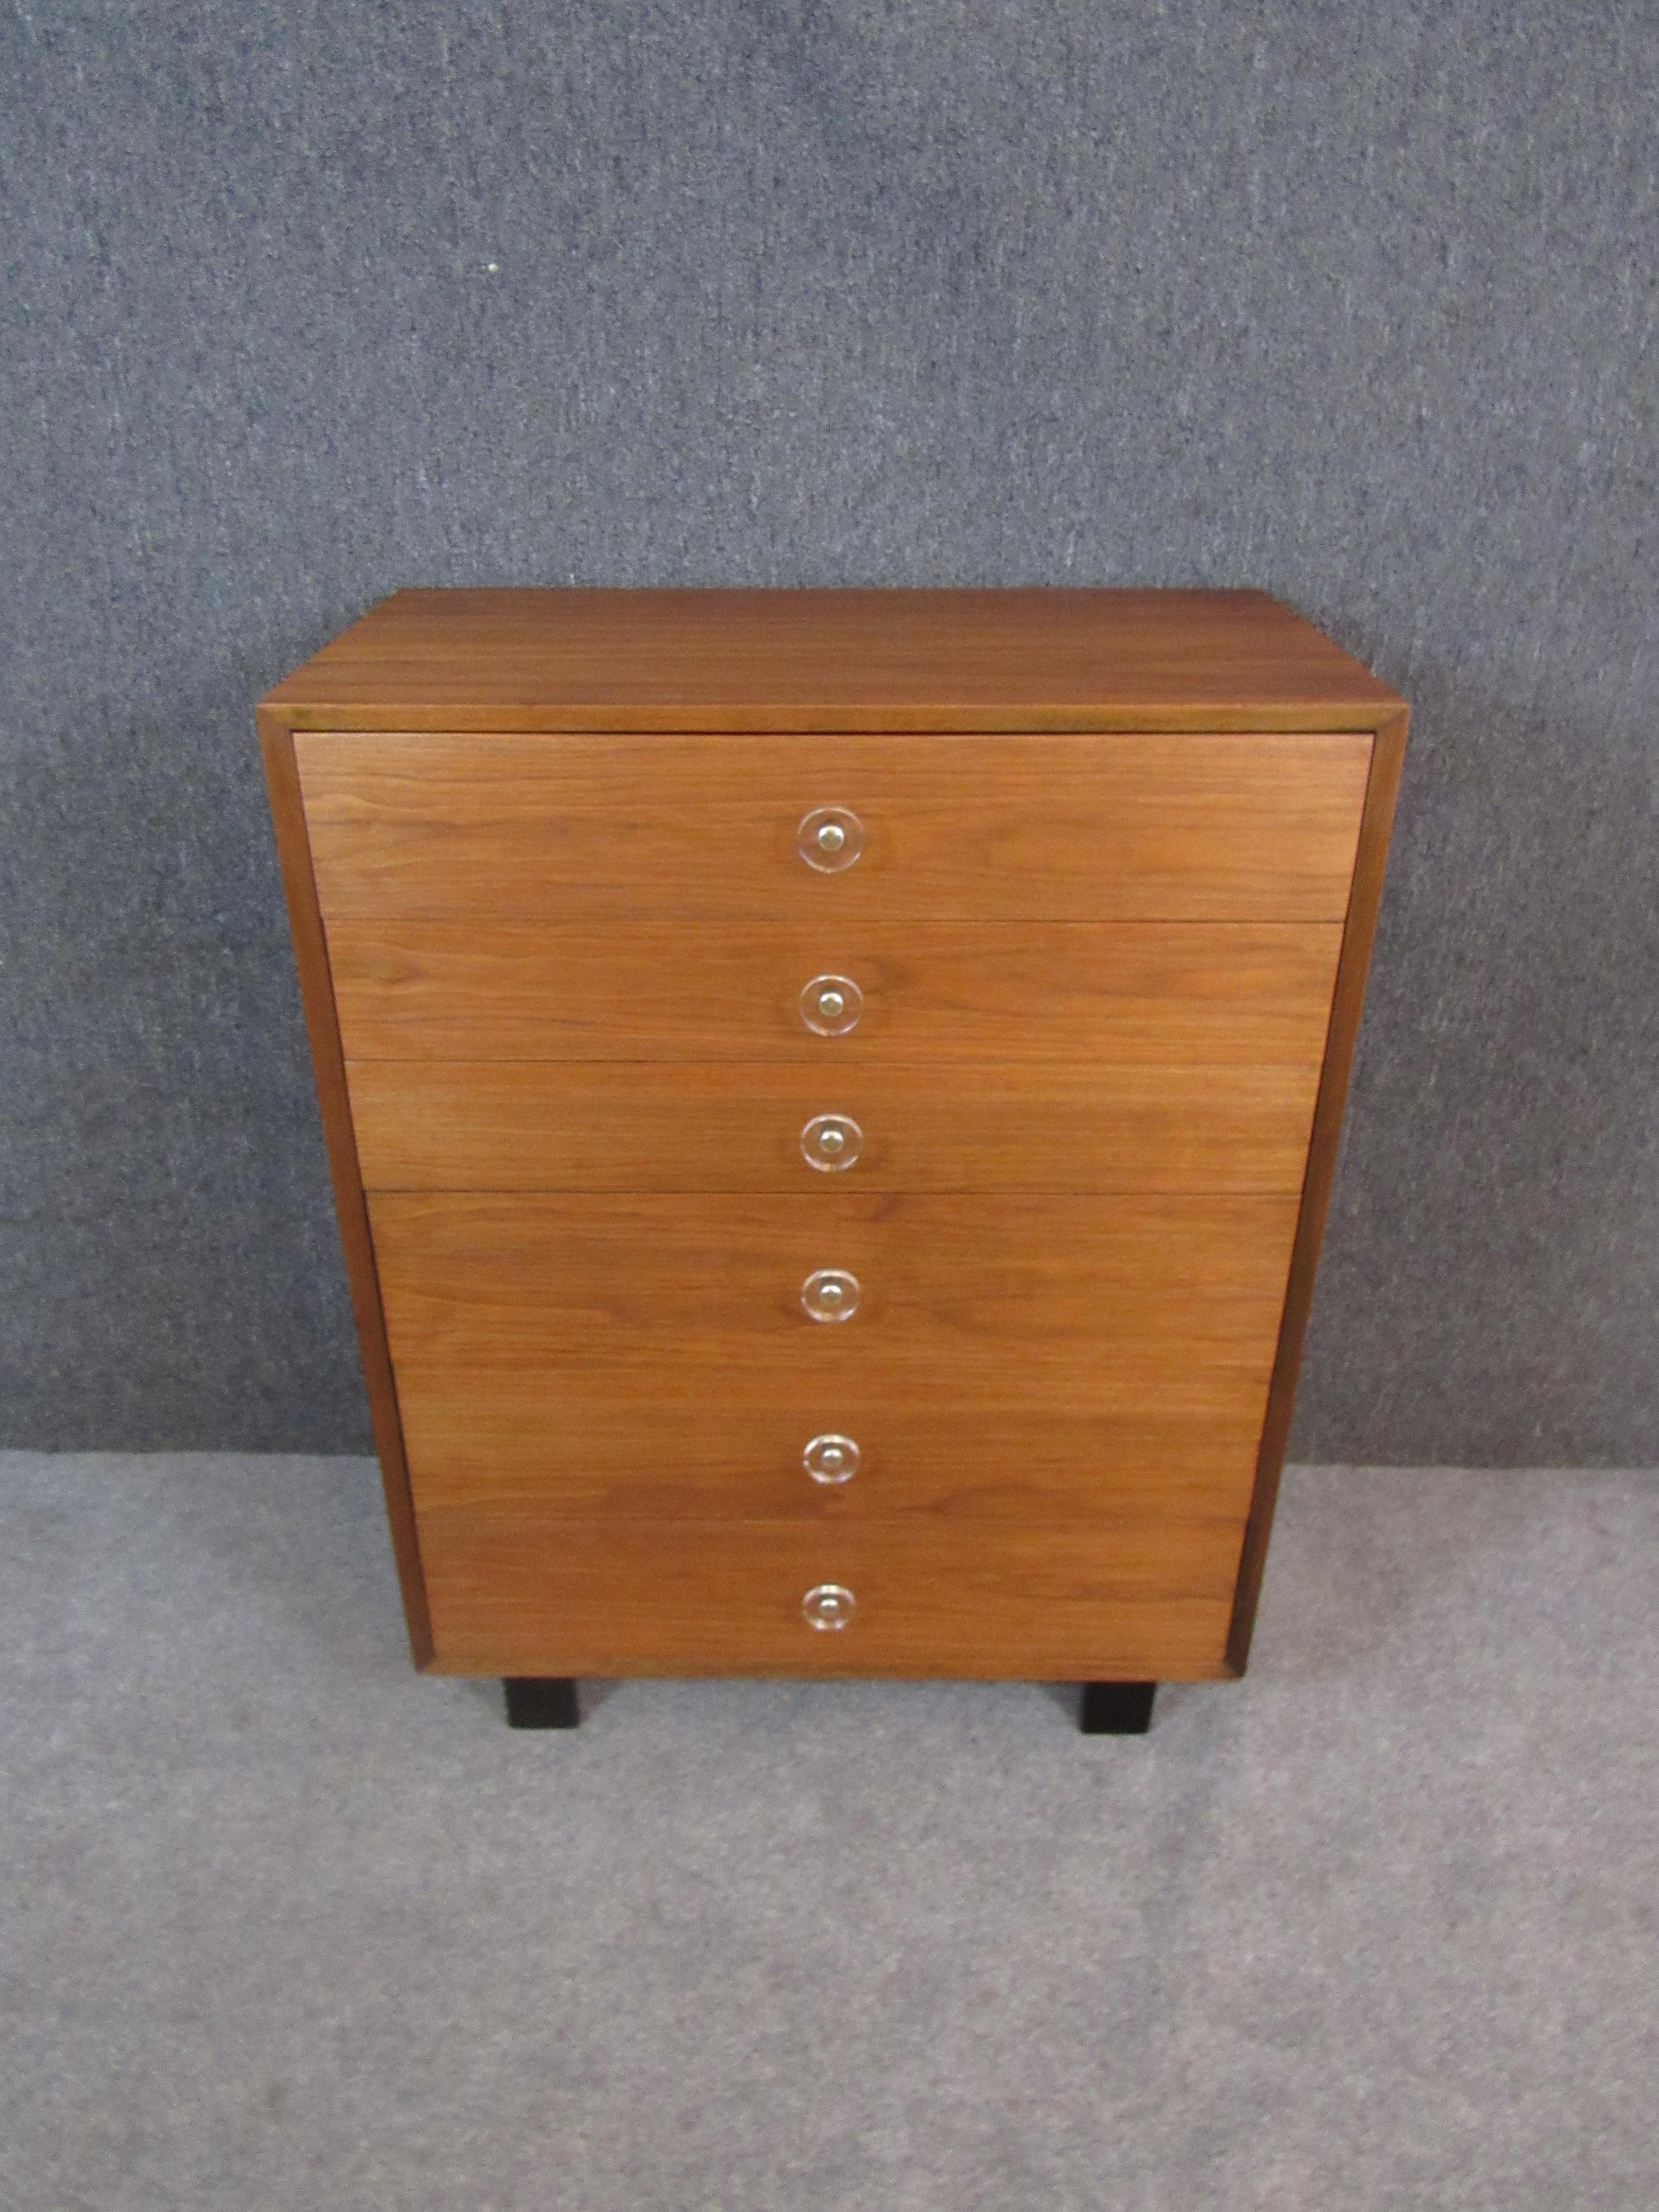 Fantastic vintage Herman Miller tall dresser created by legendary American designer George Nelson. Featuring six ample pull-out drawers, this is the ultimate storage solution for any room. Newly refinished walnut wood grain adds a lovely, natural